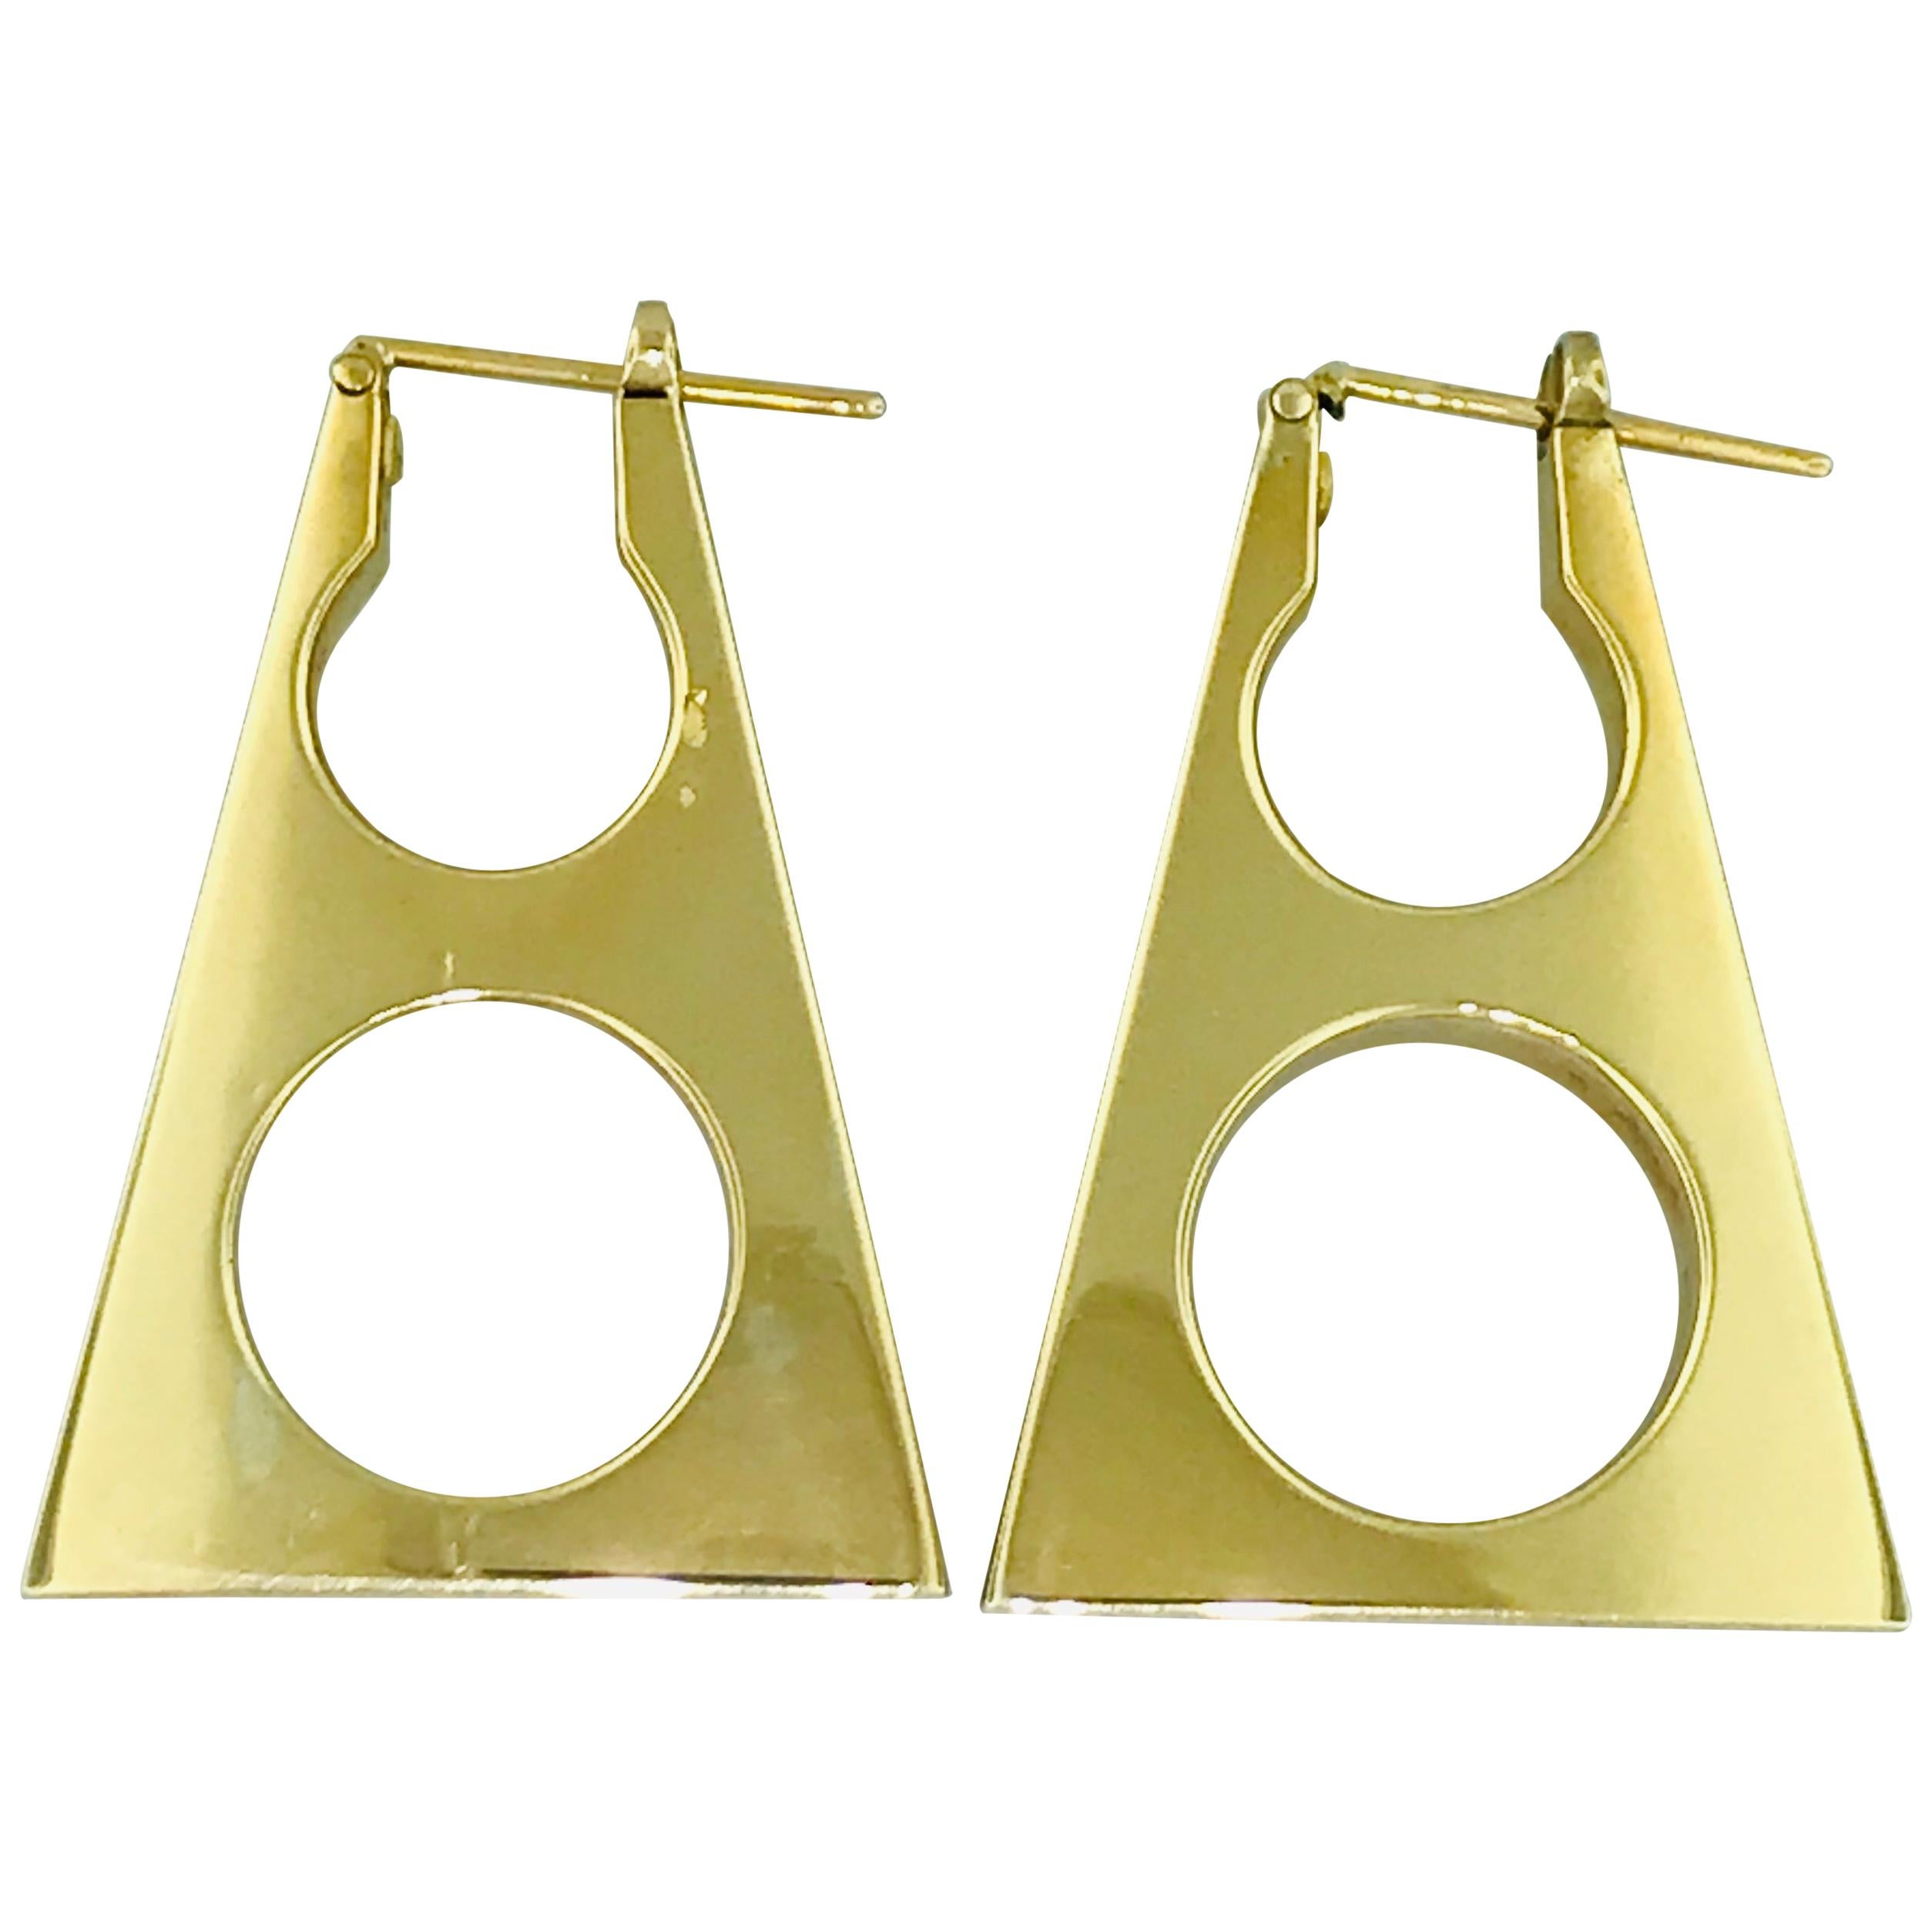 Vintage Geometric Earrings in 14 Karat Yellow Gold, Hollow and Lightweight